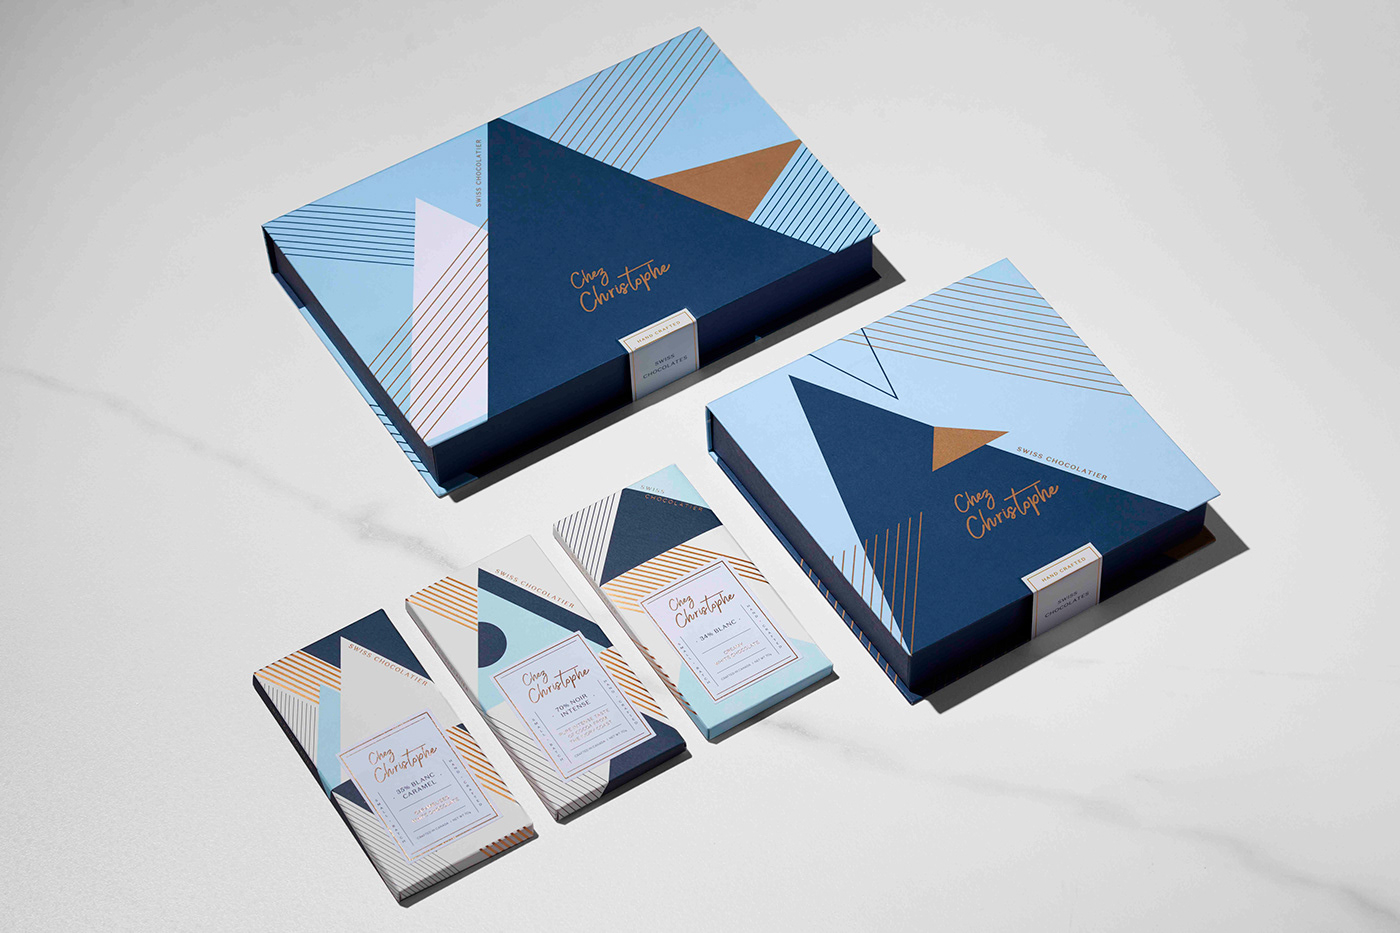 Packaging example #642: Chez Christophe Packaging Design